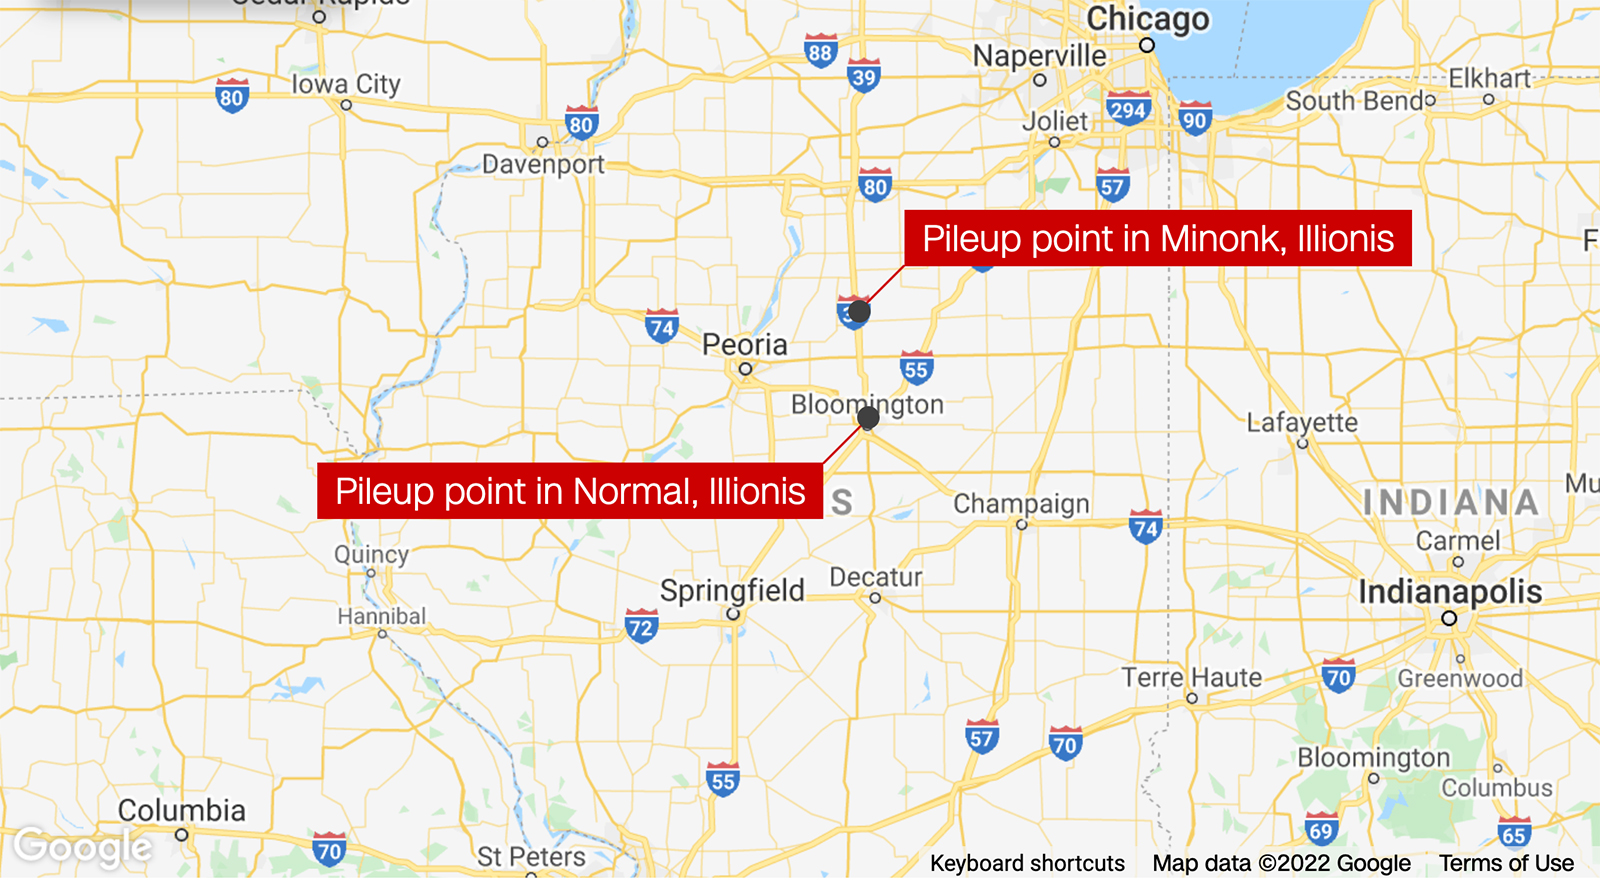 A 30-mile stretch of highway in Illinois was closed Thursday after over 100 cars were involved in m...